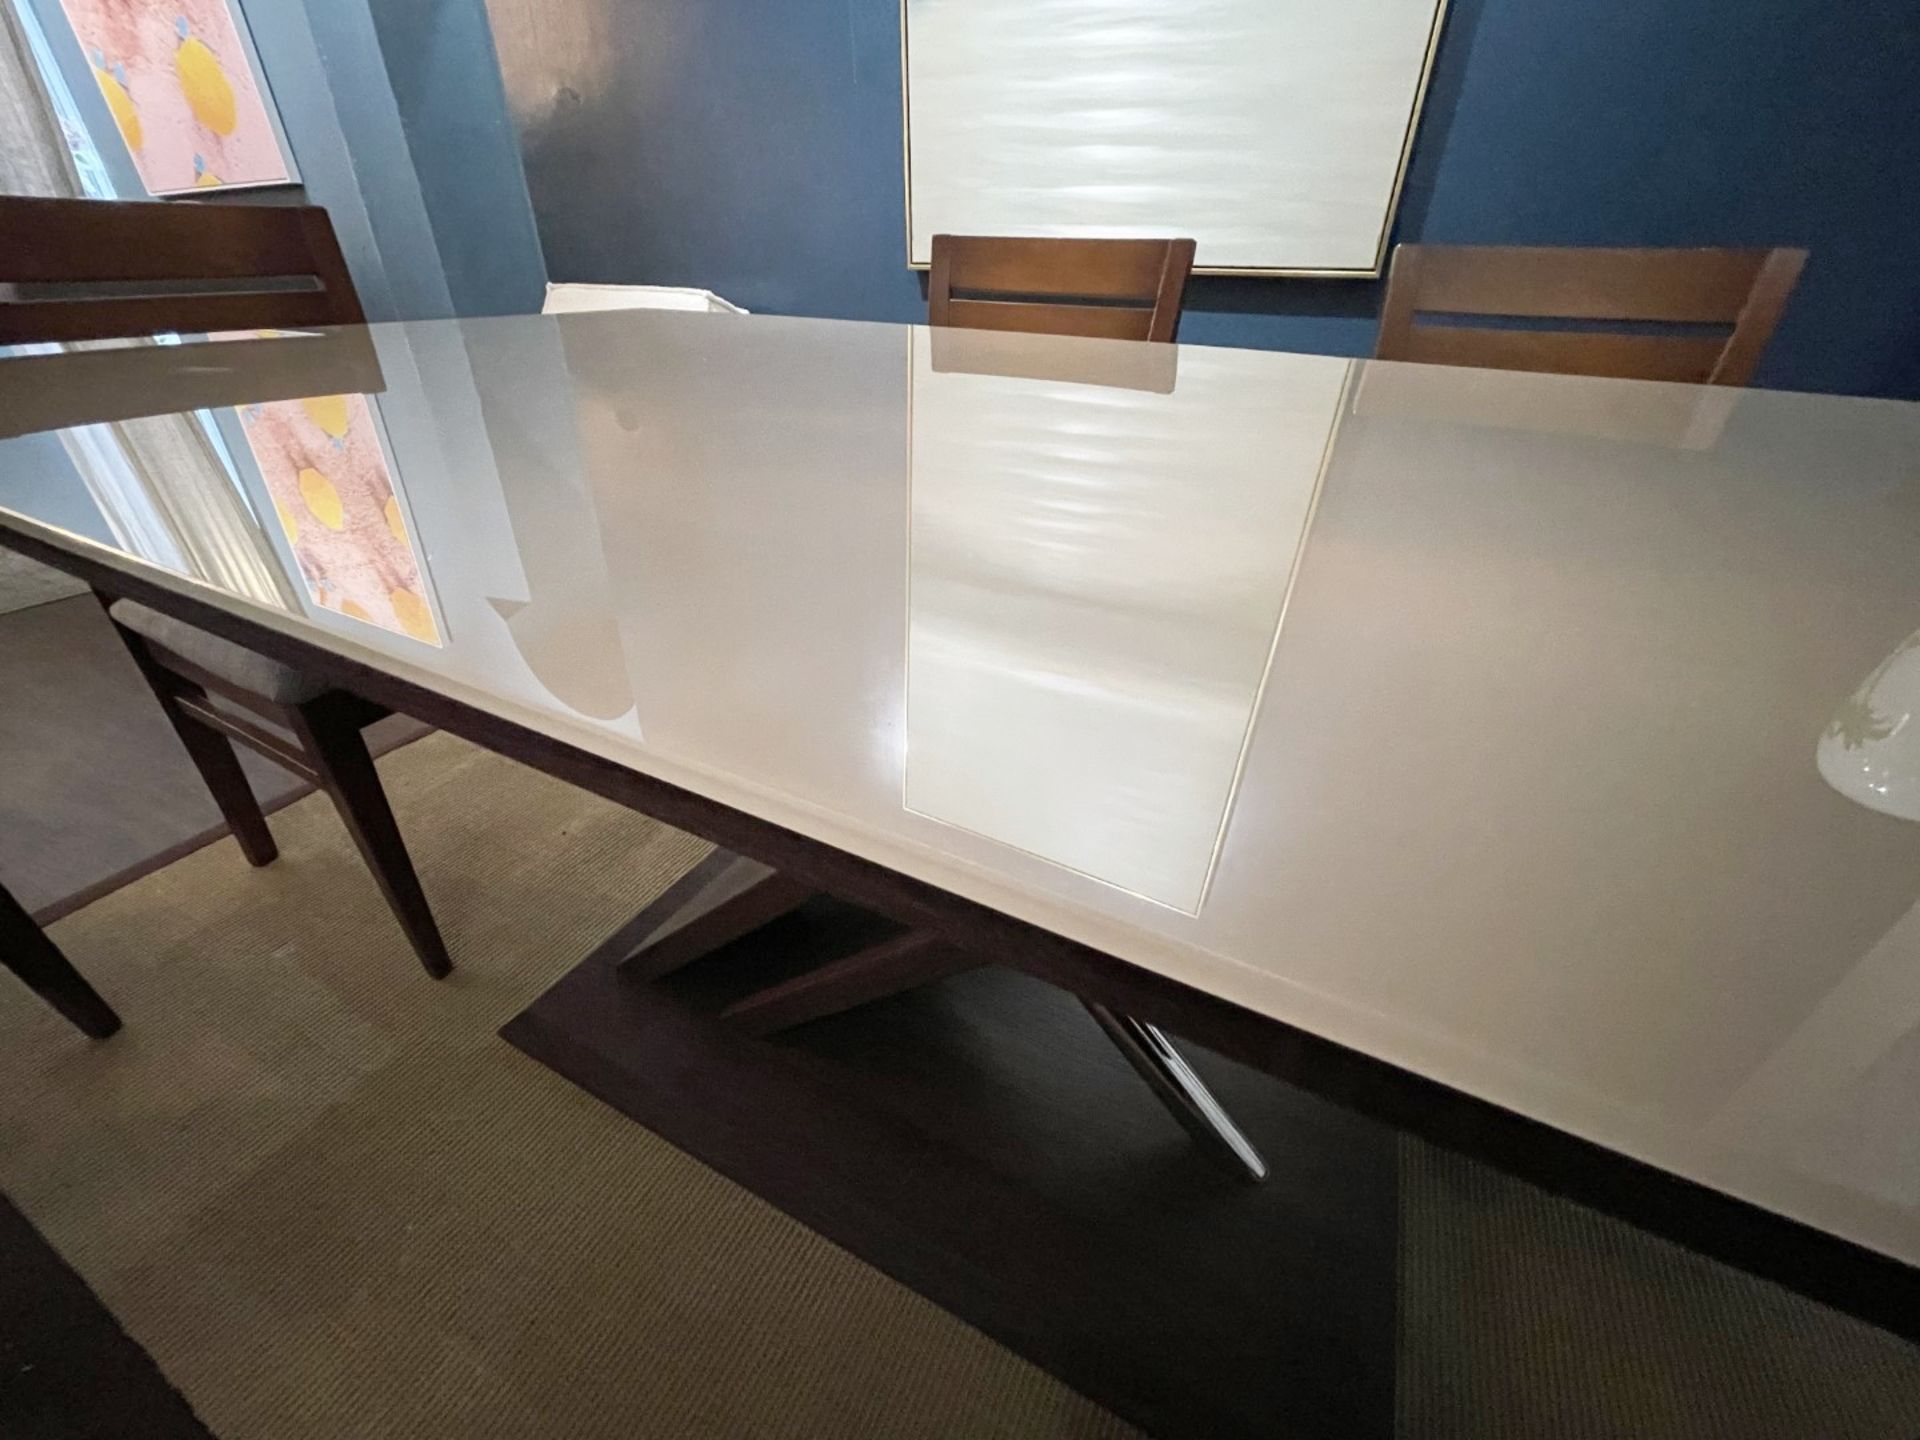 1 x VALUE MARK Rectangular Glass Topped Dining Table + 6 x Wooden Dining Chairs - Luxury Furniture - Image 2 of 23